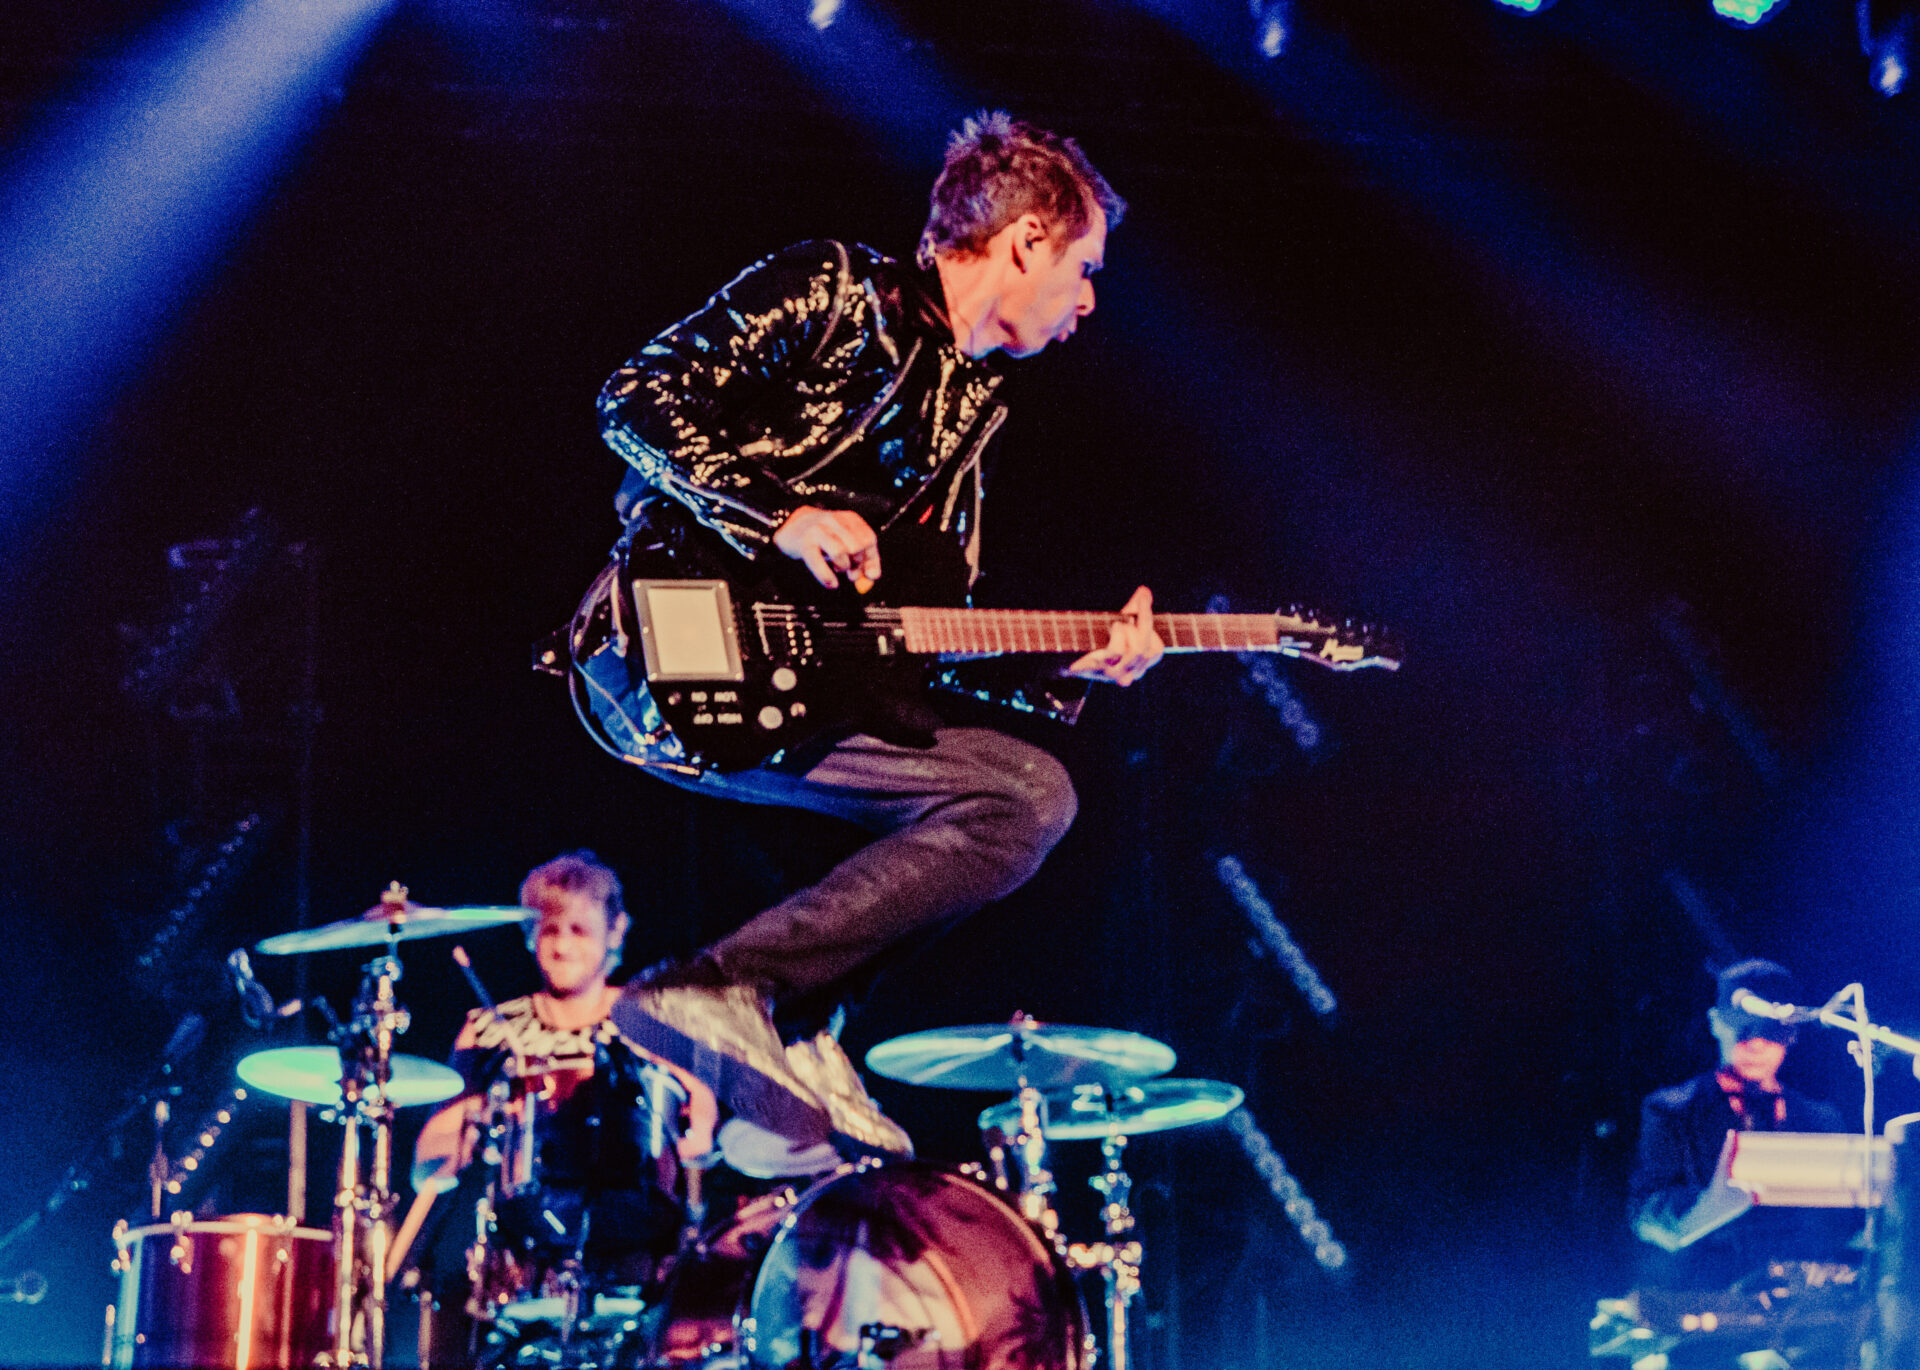 The Nights We Stole Christmas w/Muse, Smashing Pumpkins, and more!